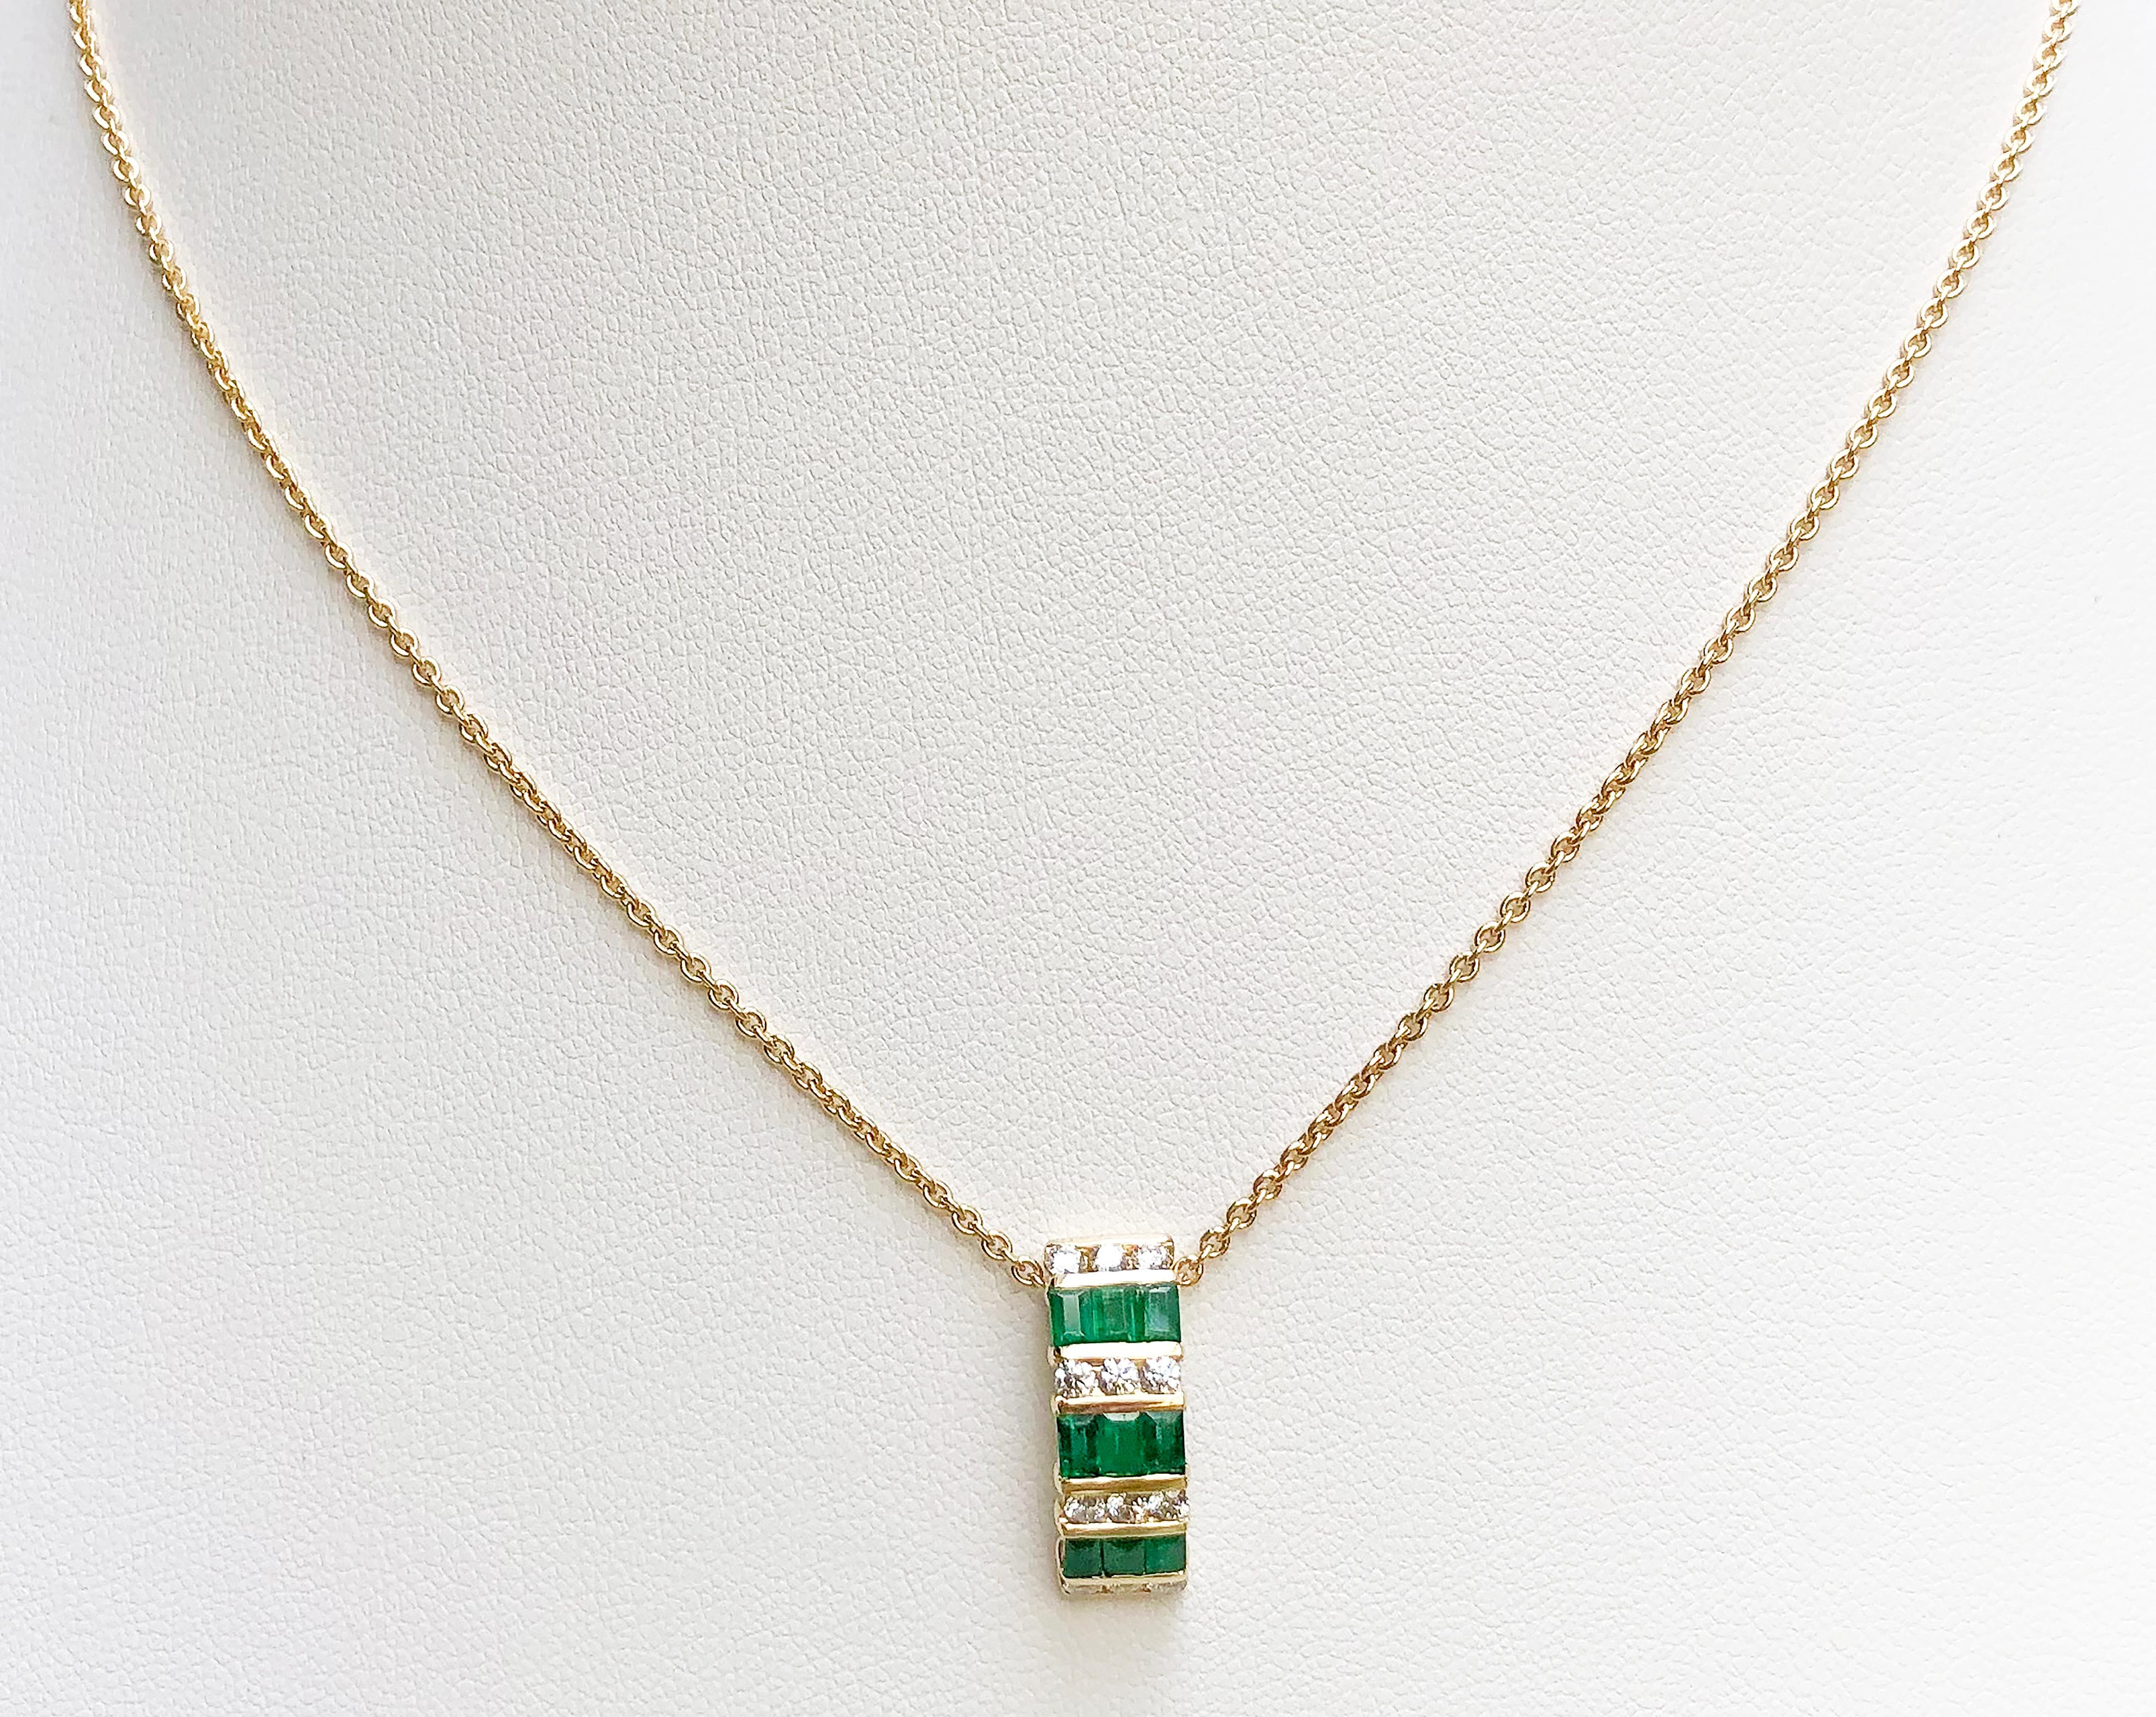 Emerald 0.61 carat with Diamond 0.35 carat Pendant set in 18 Karat Gold Settings
(chain not included)

Width:  0.6 cm 
Length: 1.9 cm
Total Weight: 2.48 grams

